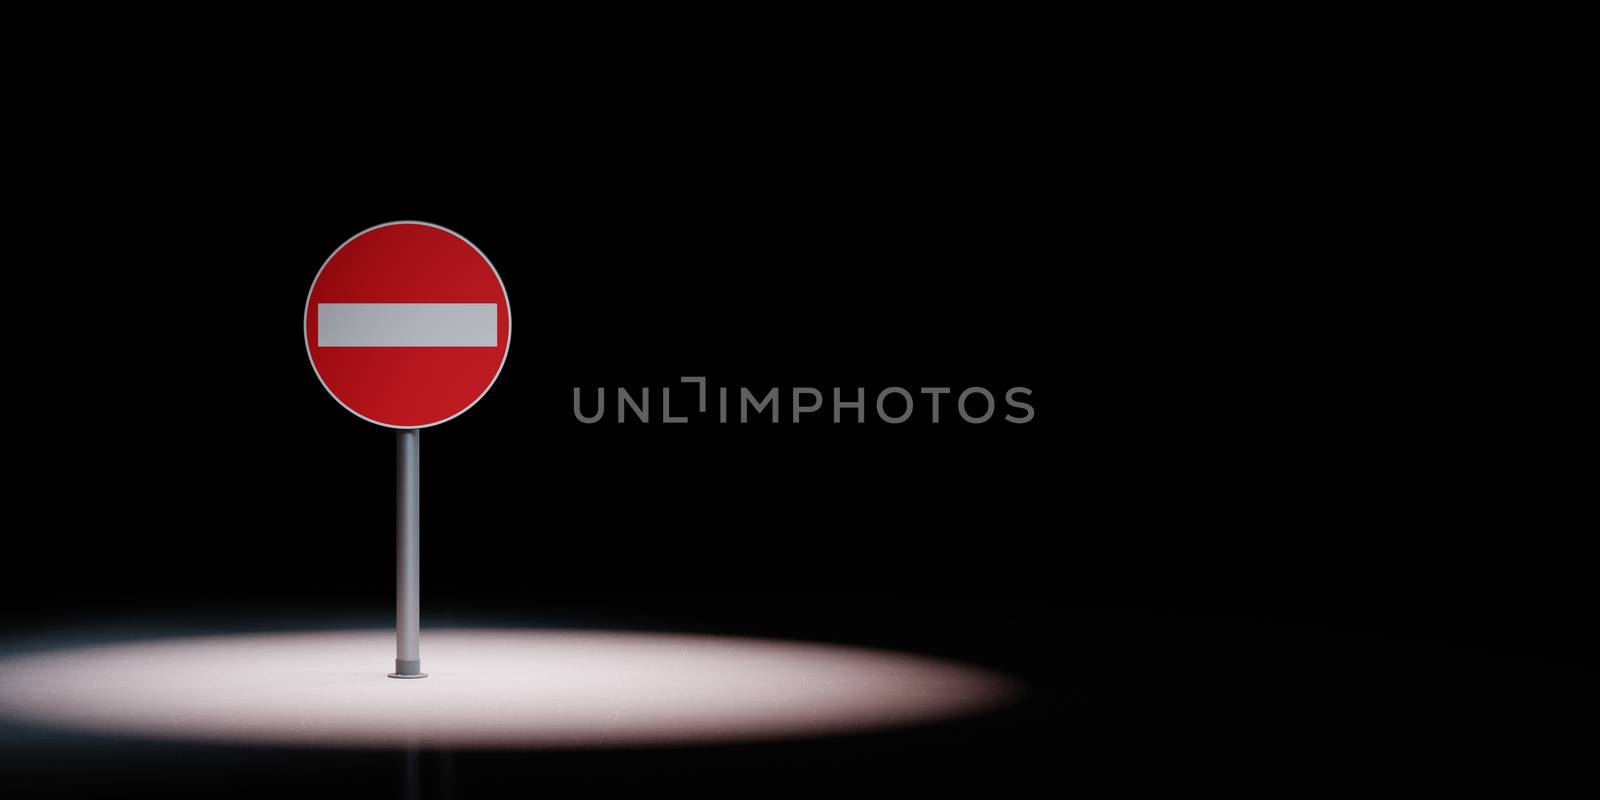 Access Denied Road Sign Spotlighted on Black Background by make